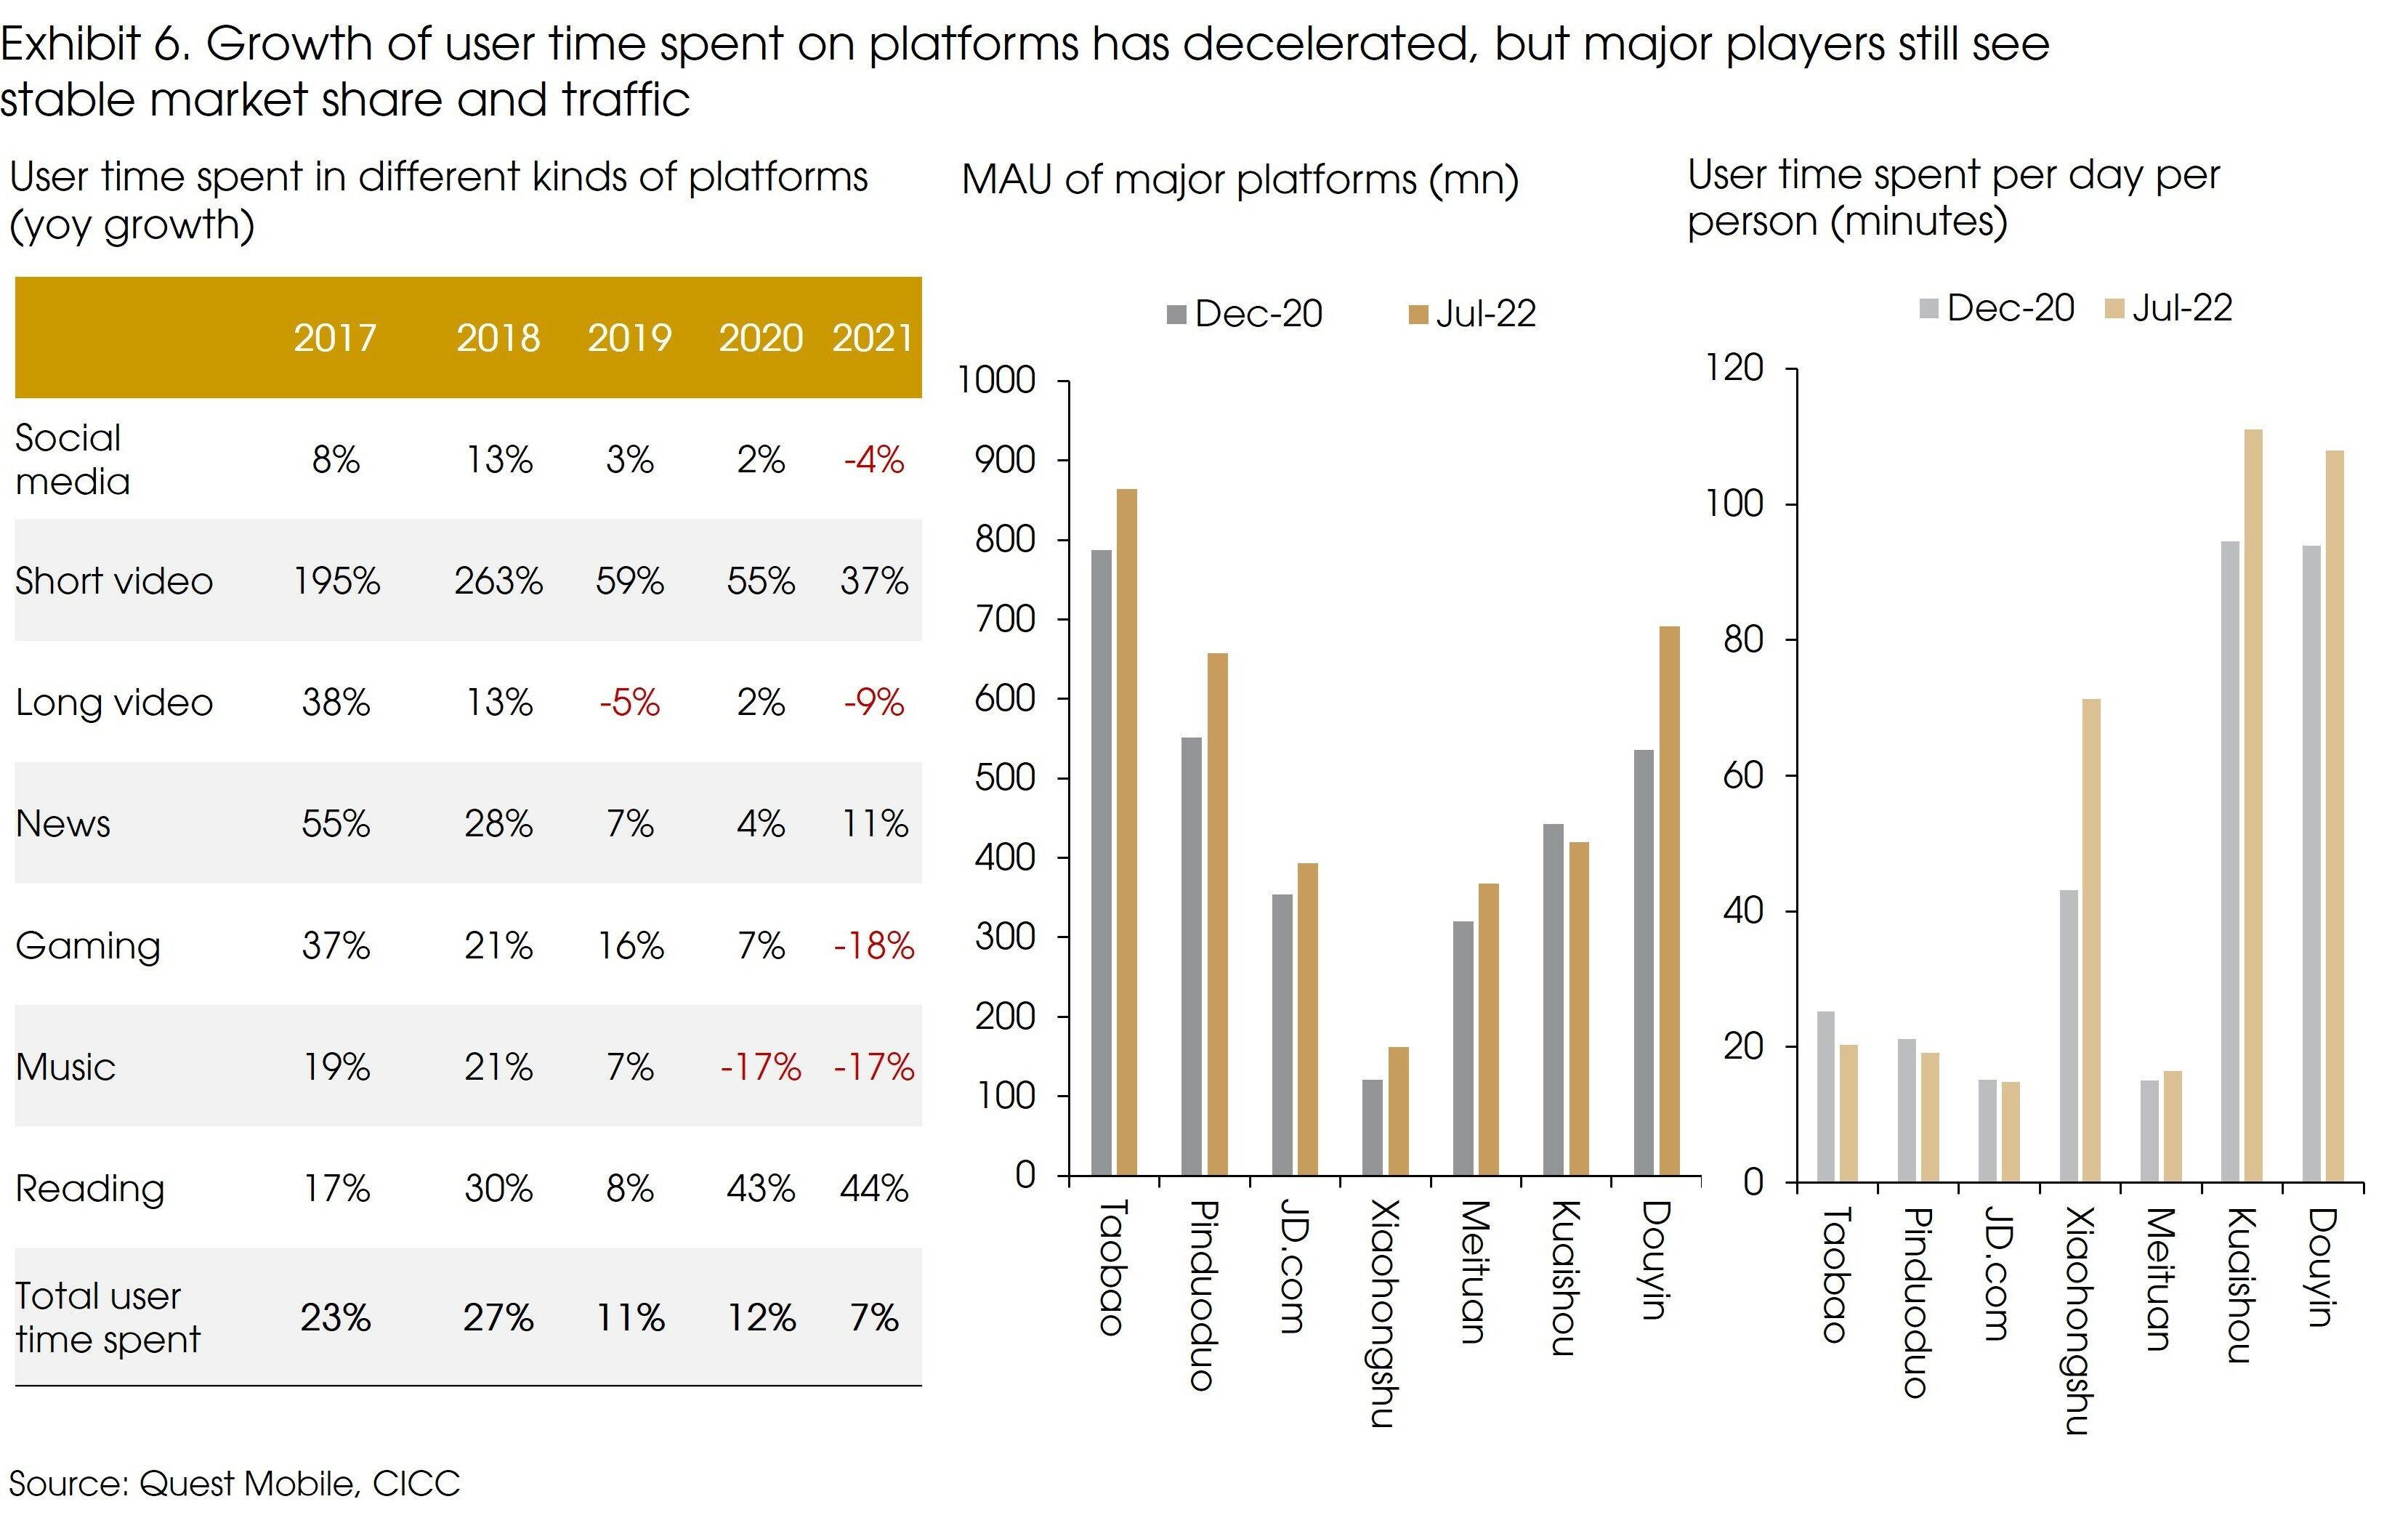 Exhibit 6 Growth of User Time Spent On Platforms Has Decelerated But Major Players Still See Stable Market Share and Traffic